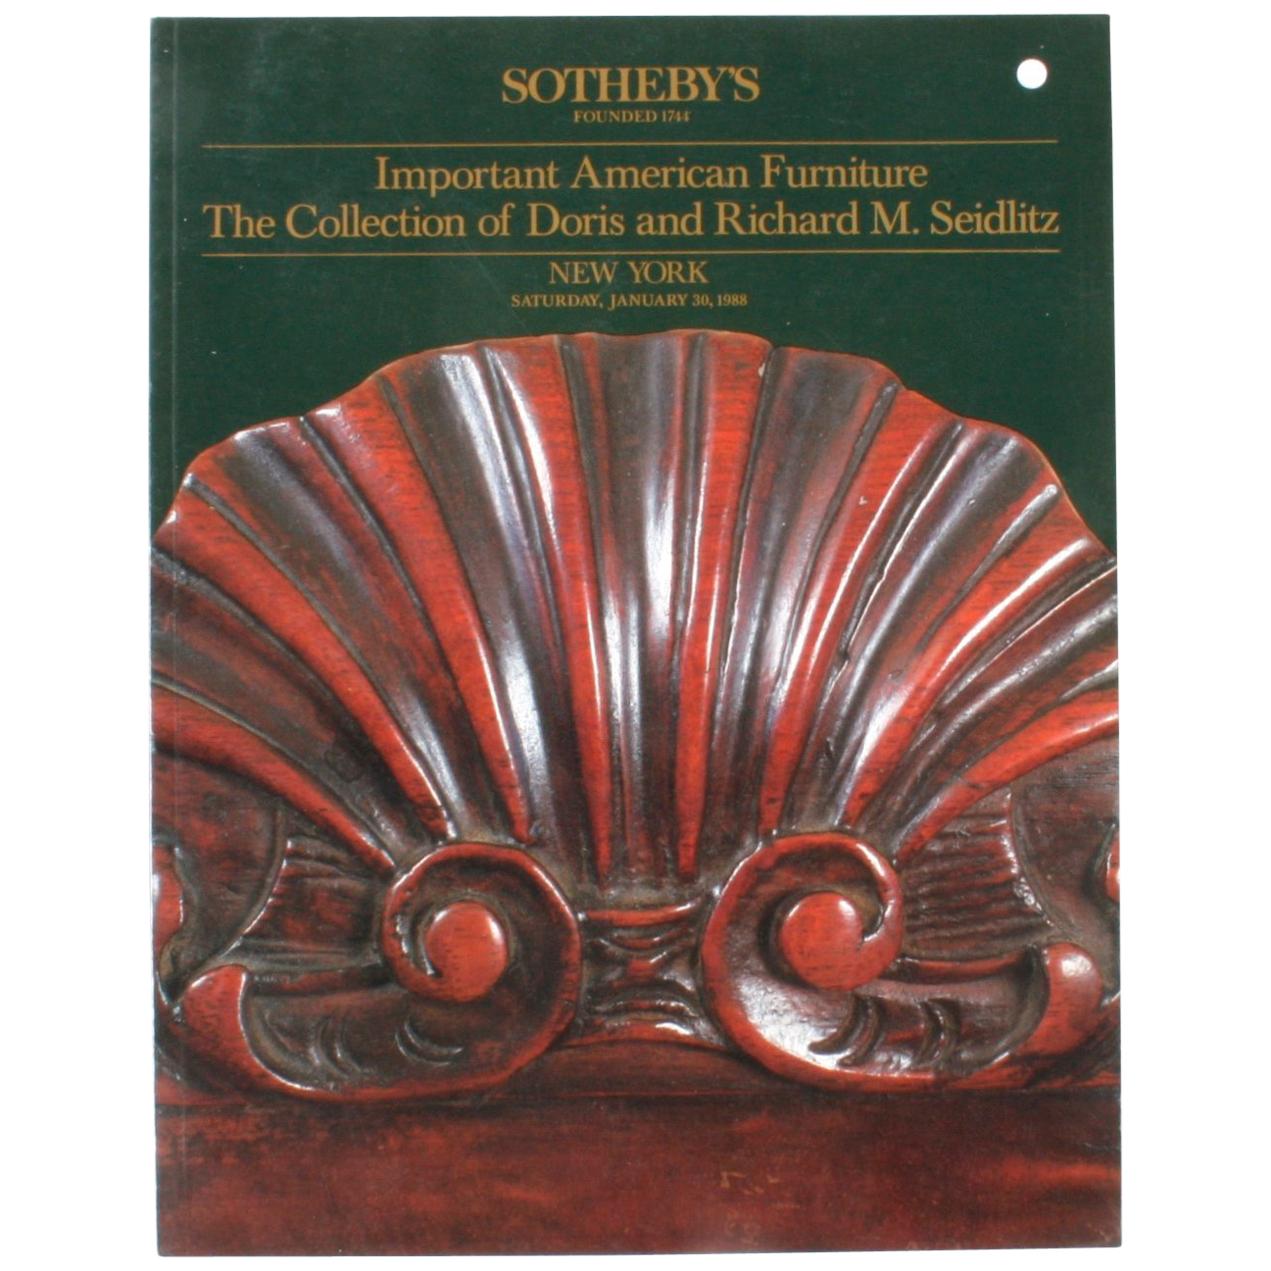 Sotheby's, Important American Furniture of Doris and Richard M. Seidlitz